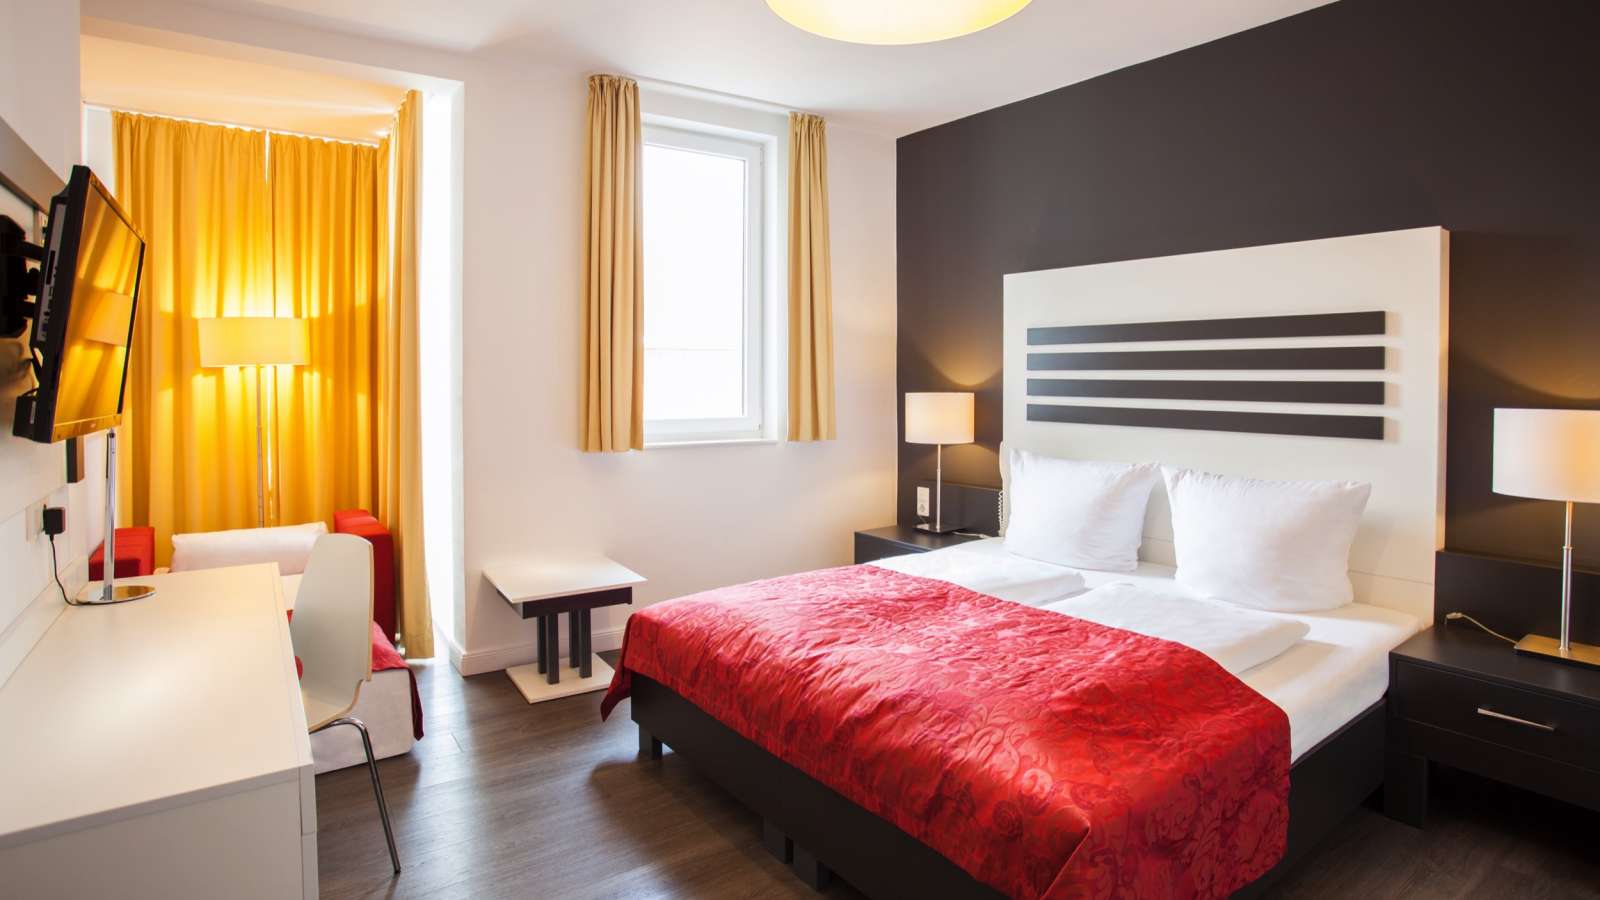 A double room at Centro Hotel Le Boutique in Hamburg